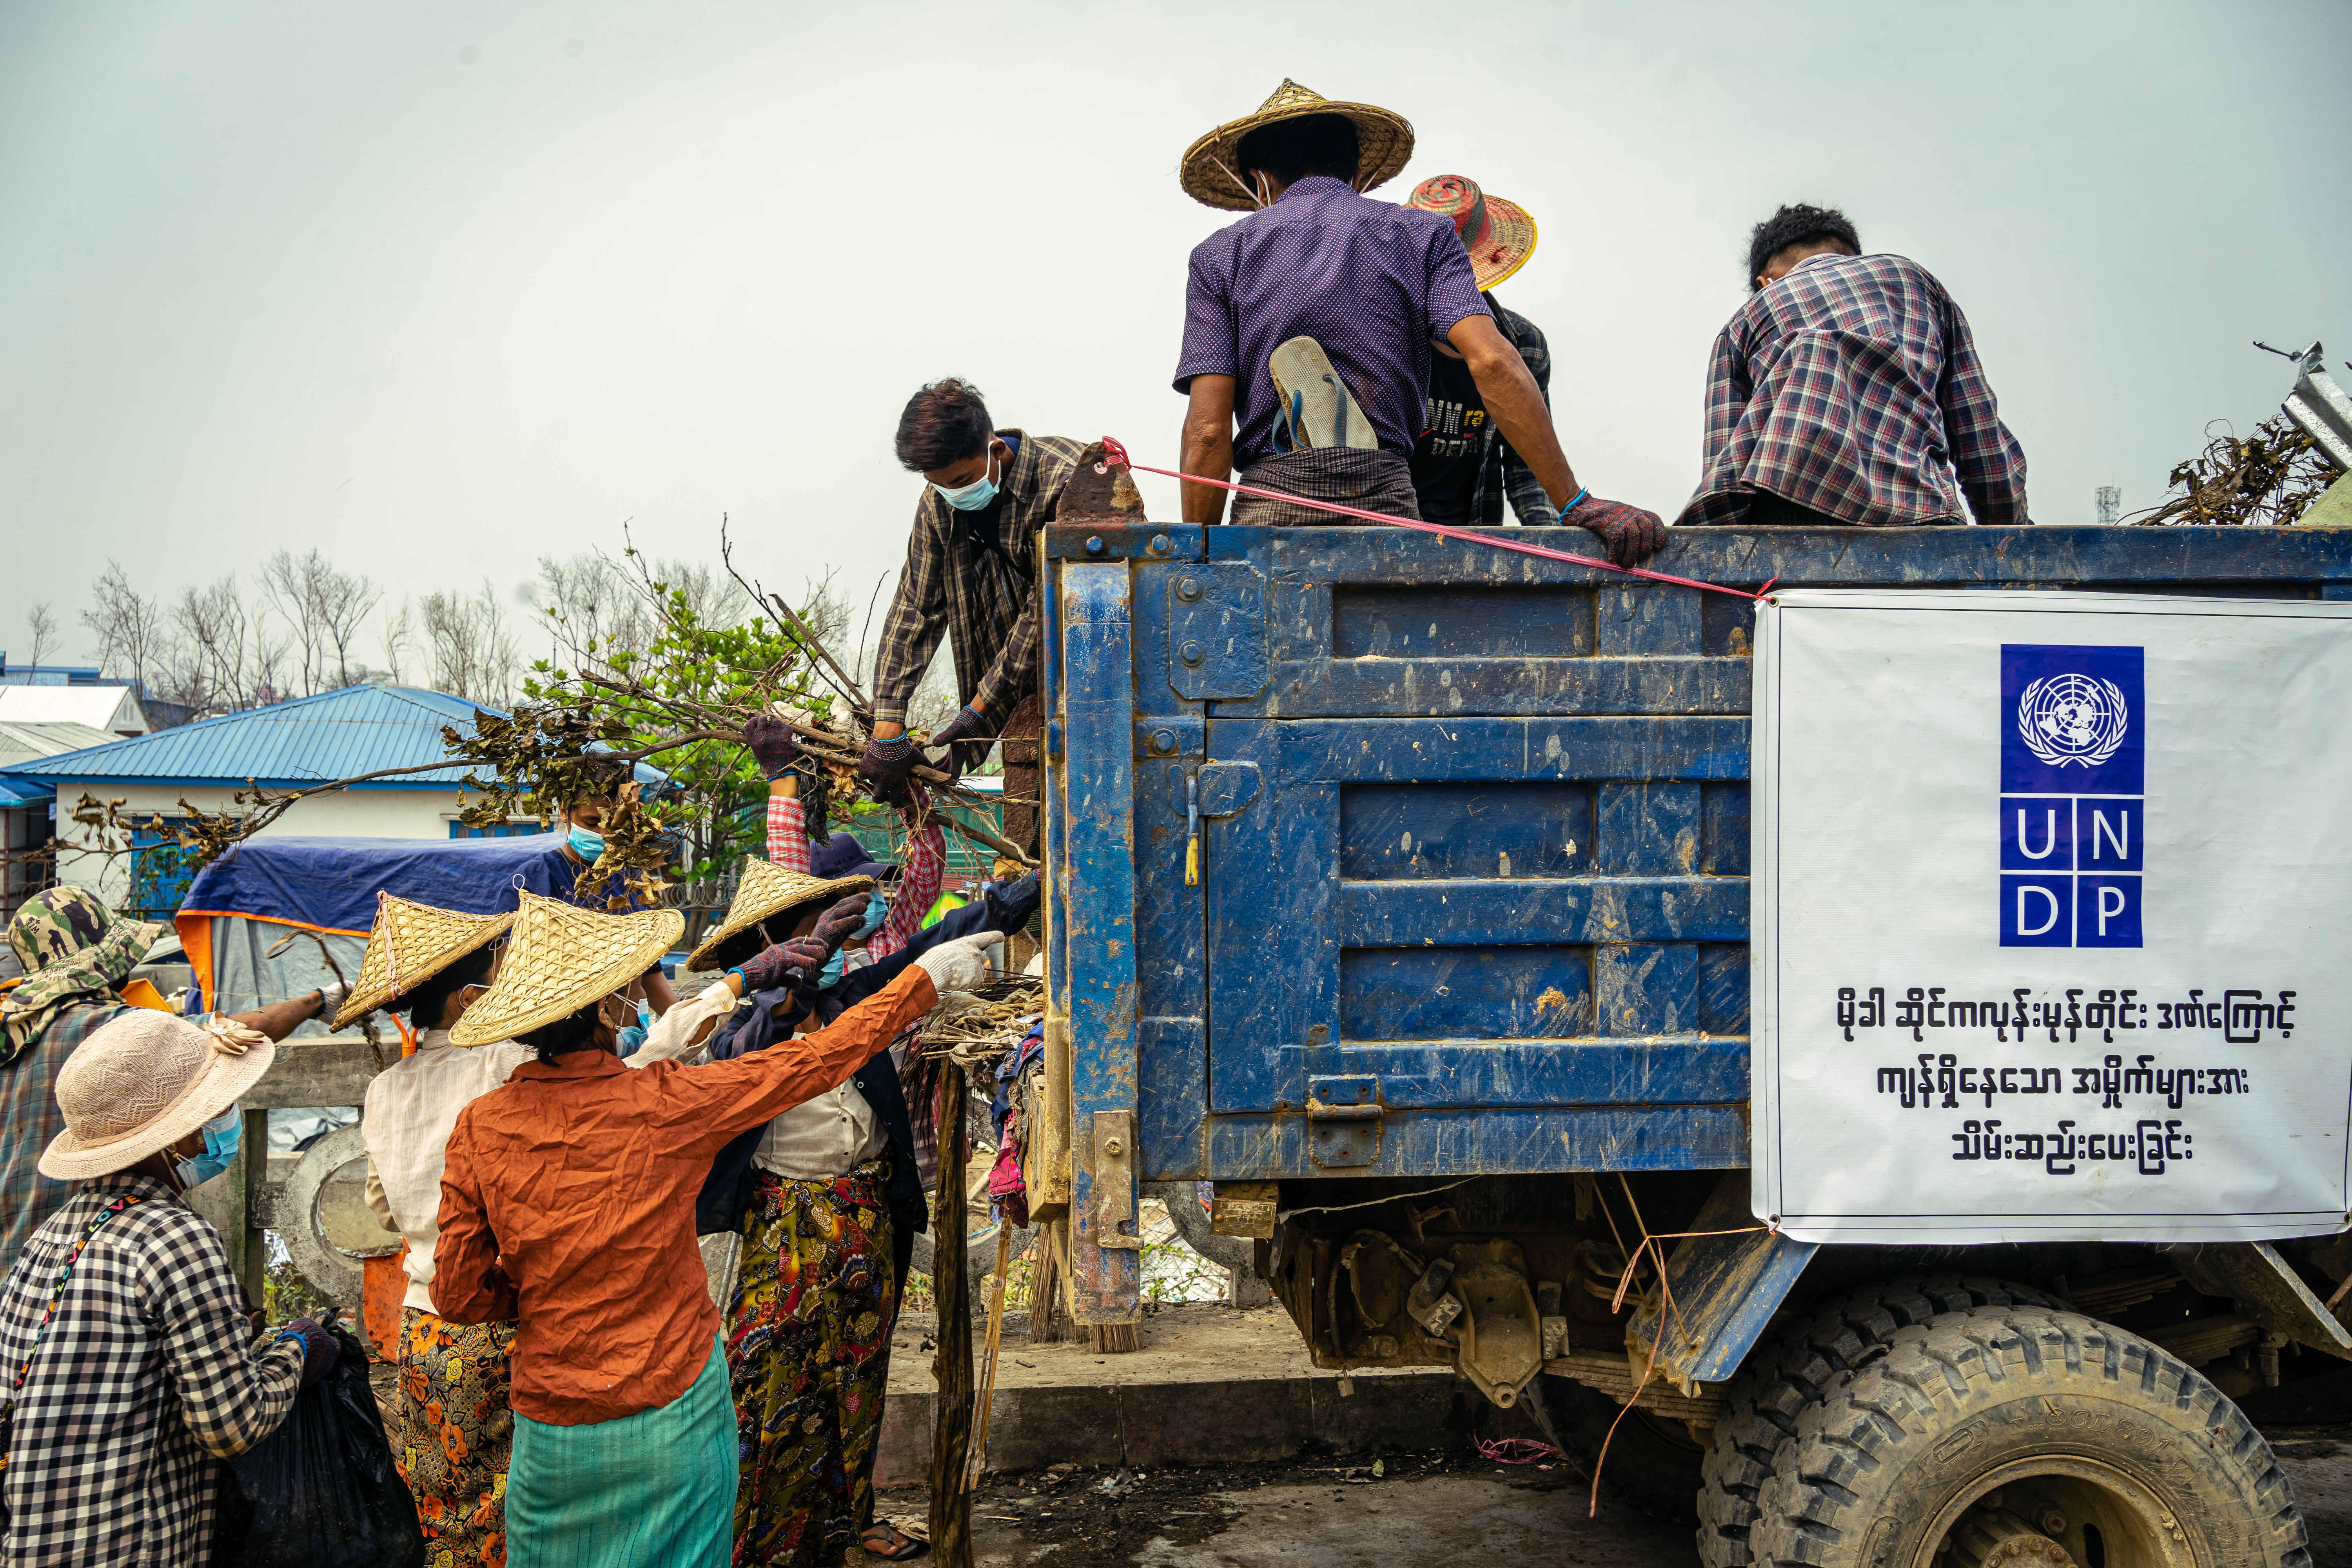  Workers from Sittwe’s IDP camps clear debris, a cash-for-work activity that provides temporary income providing a critical hand-up during emergencies